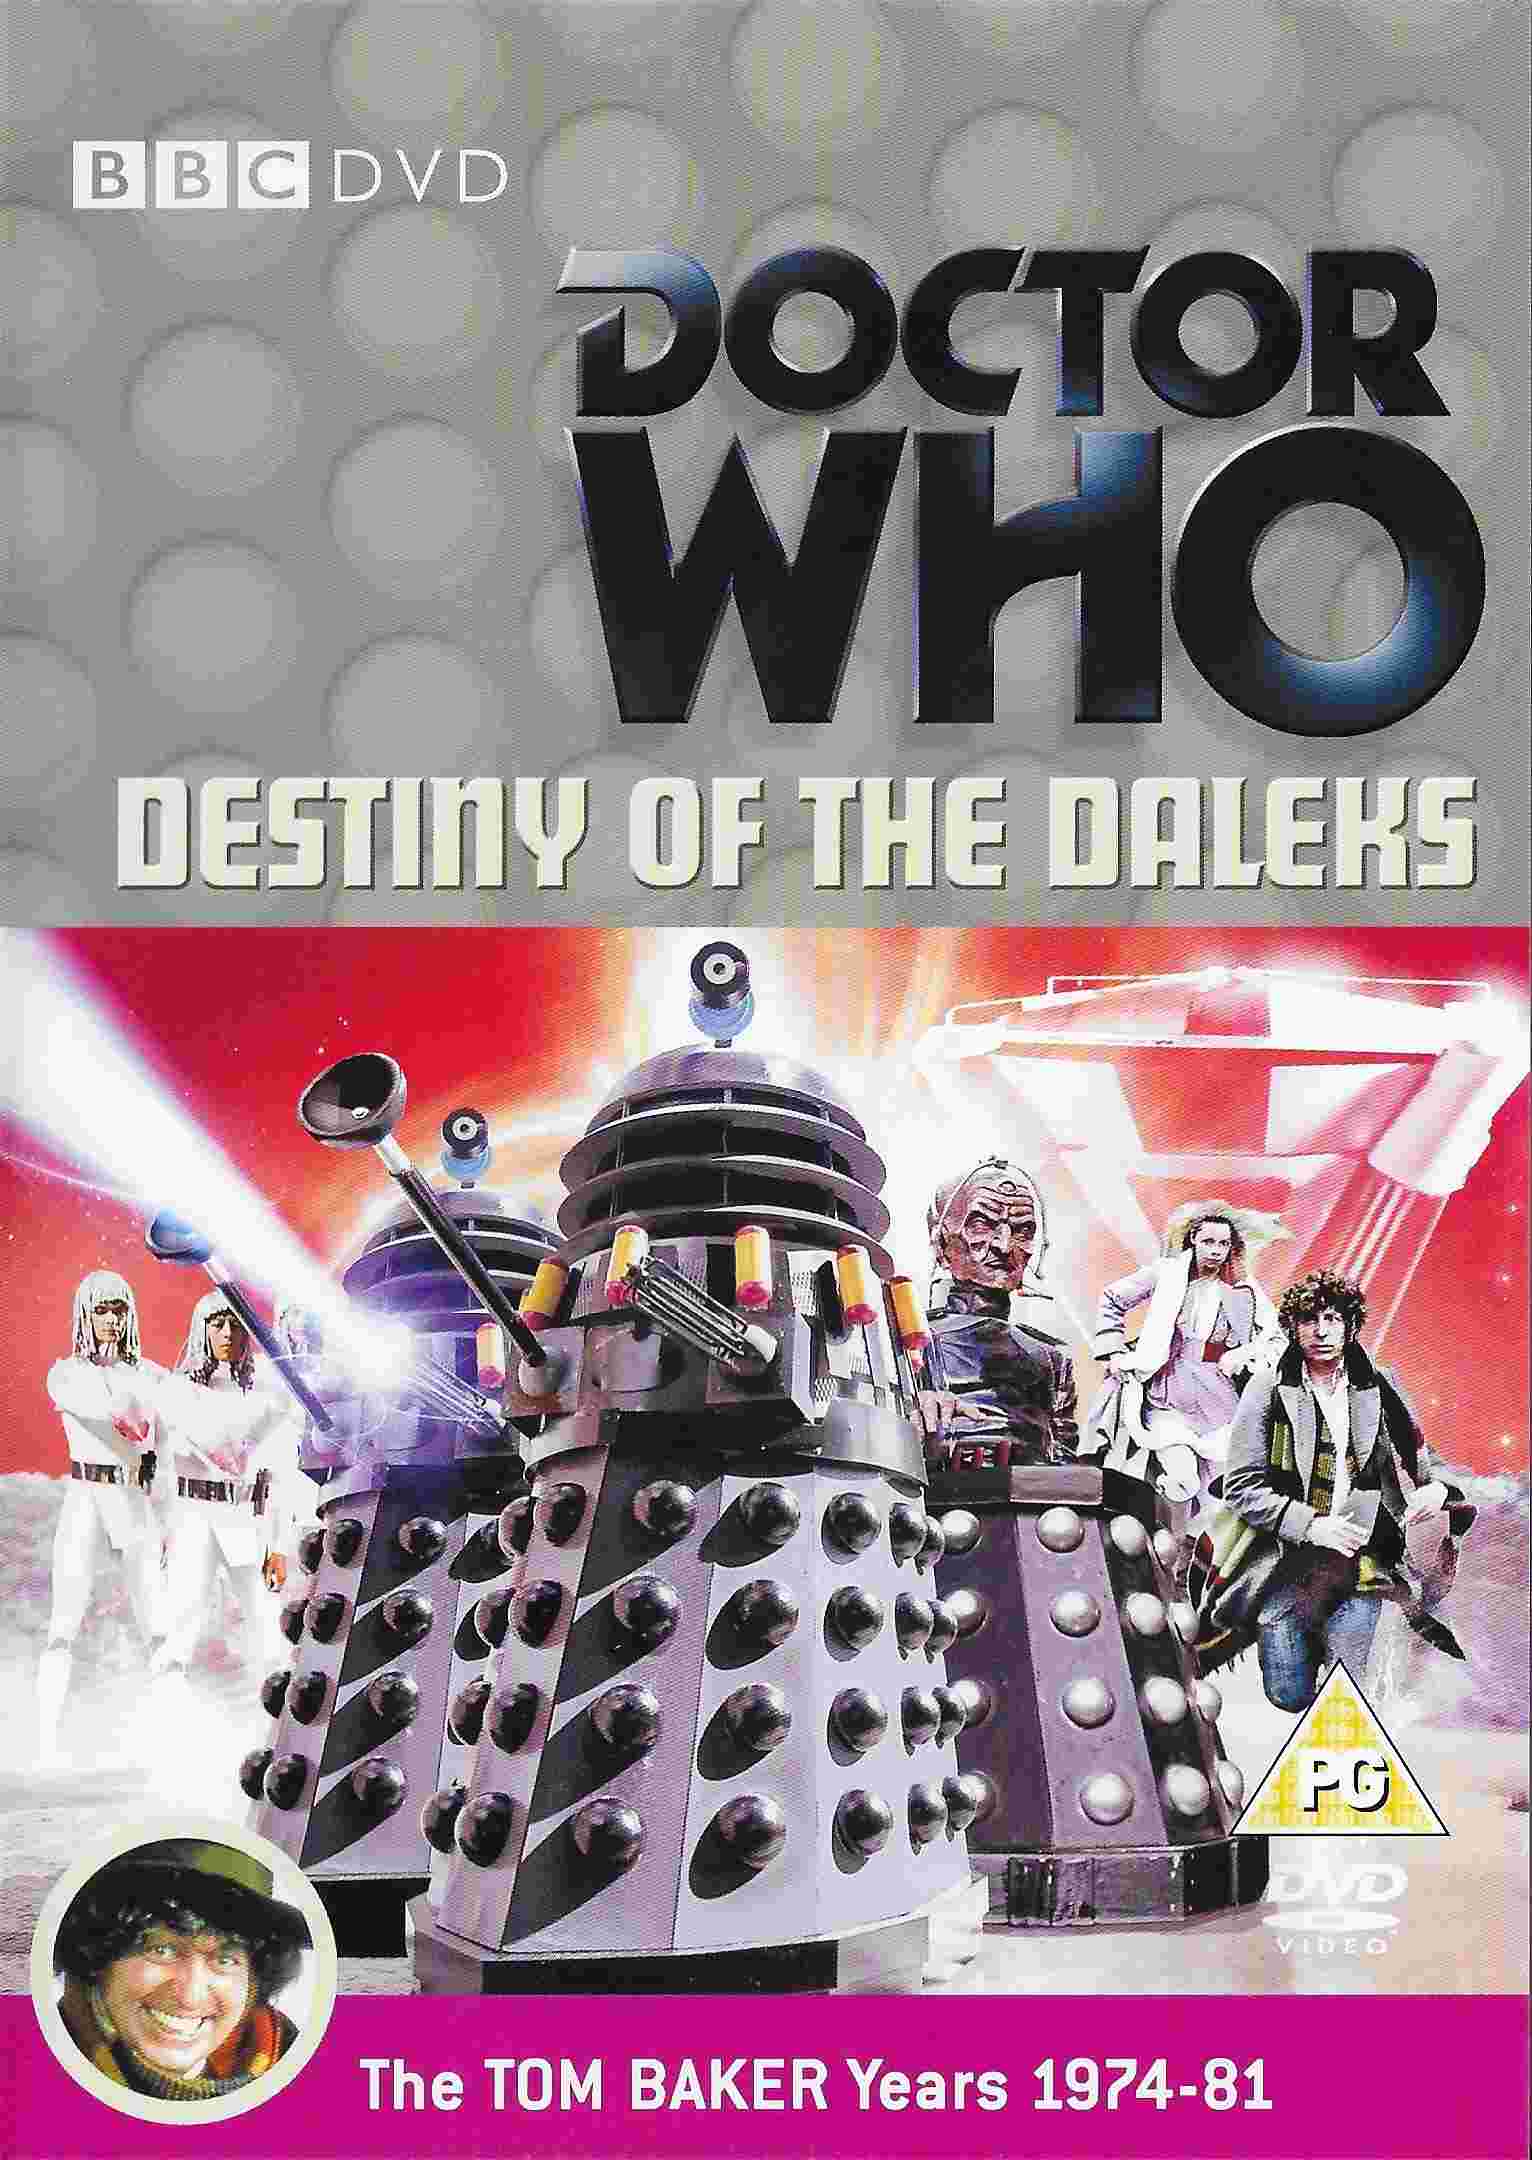 Picture of BBCDVD 2434 Doctor Who - Destiny of the Daleks by artist Terry Nation from the BBC dvds - Records and Tapes library